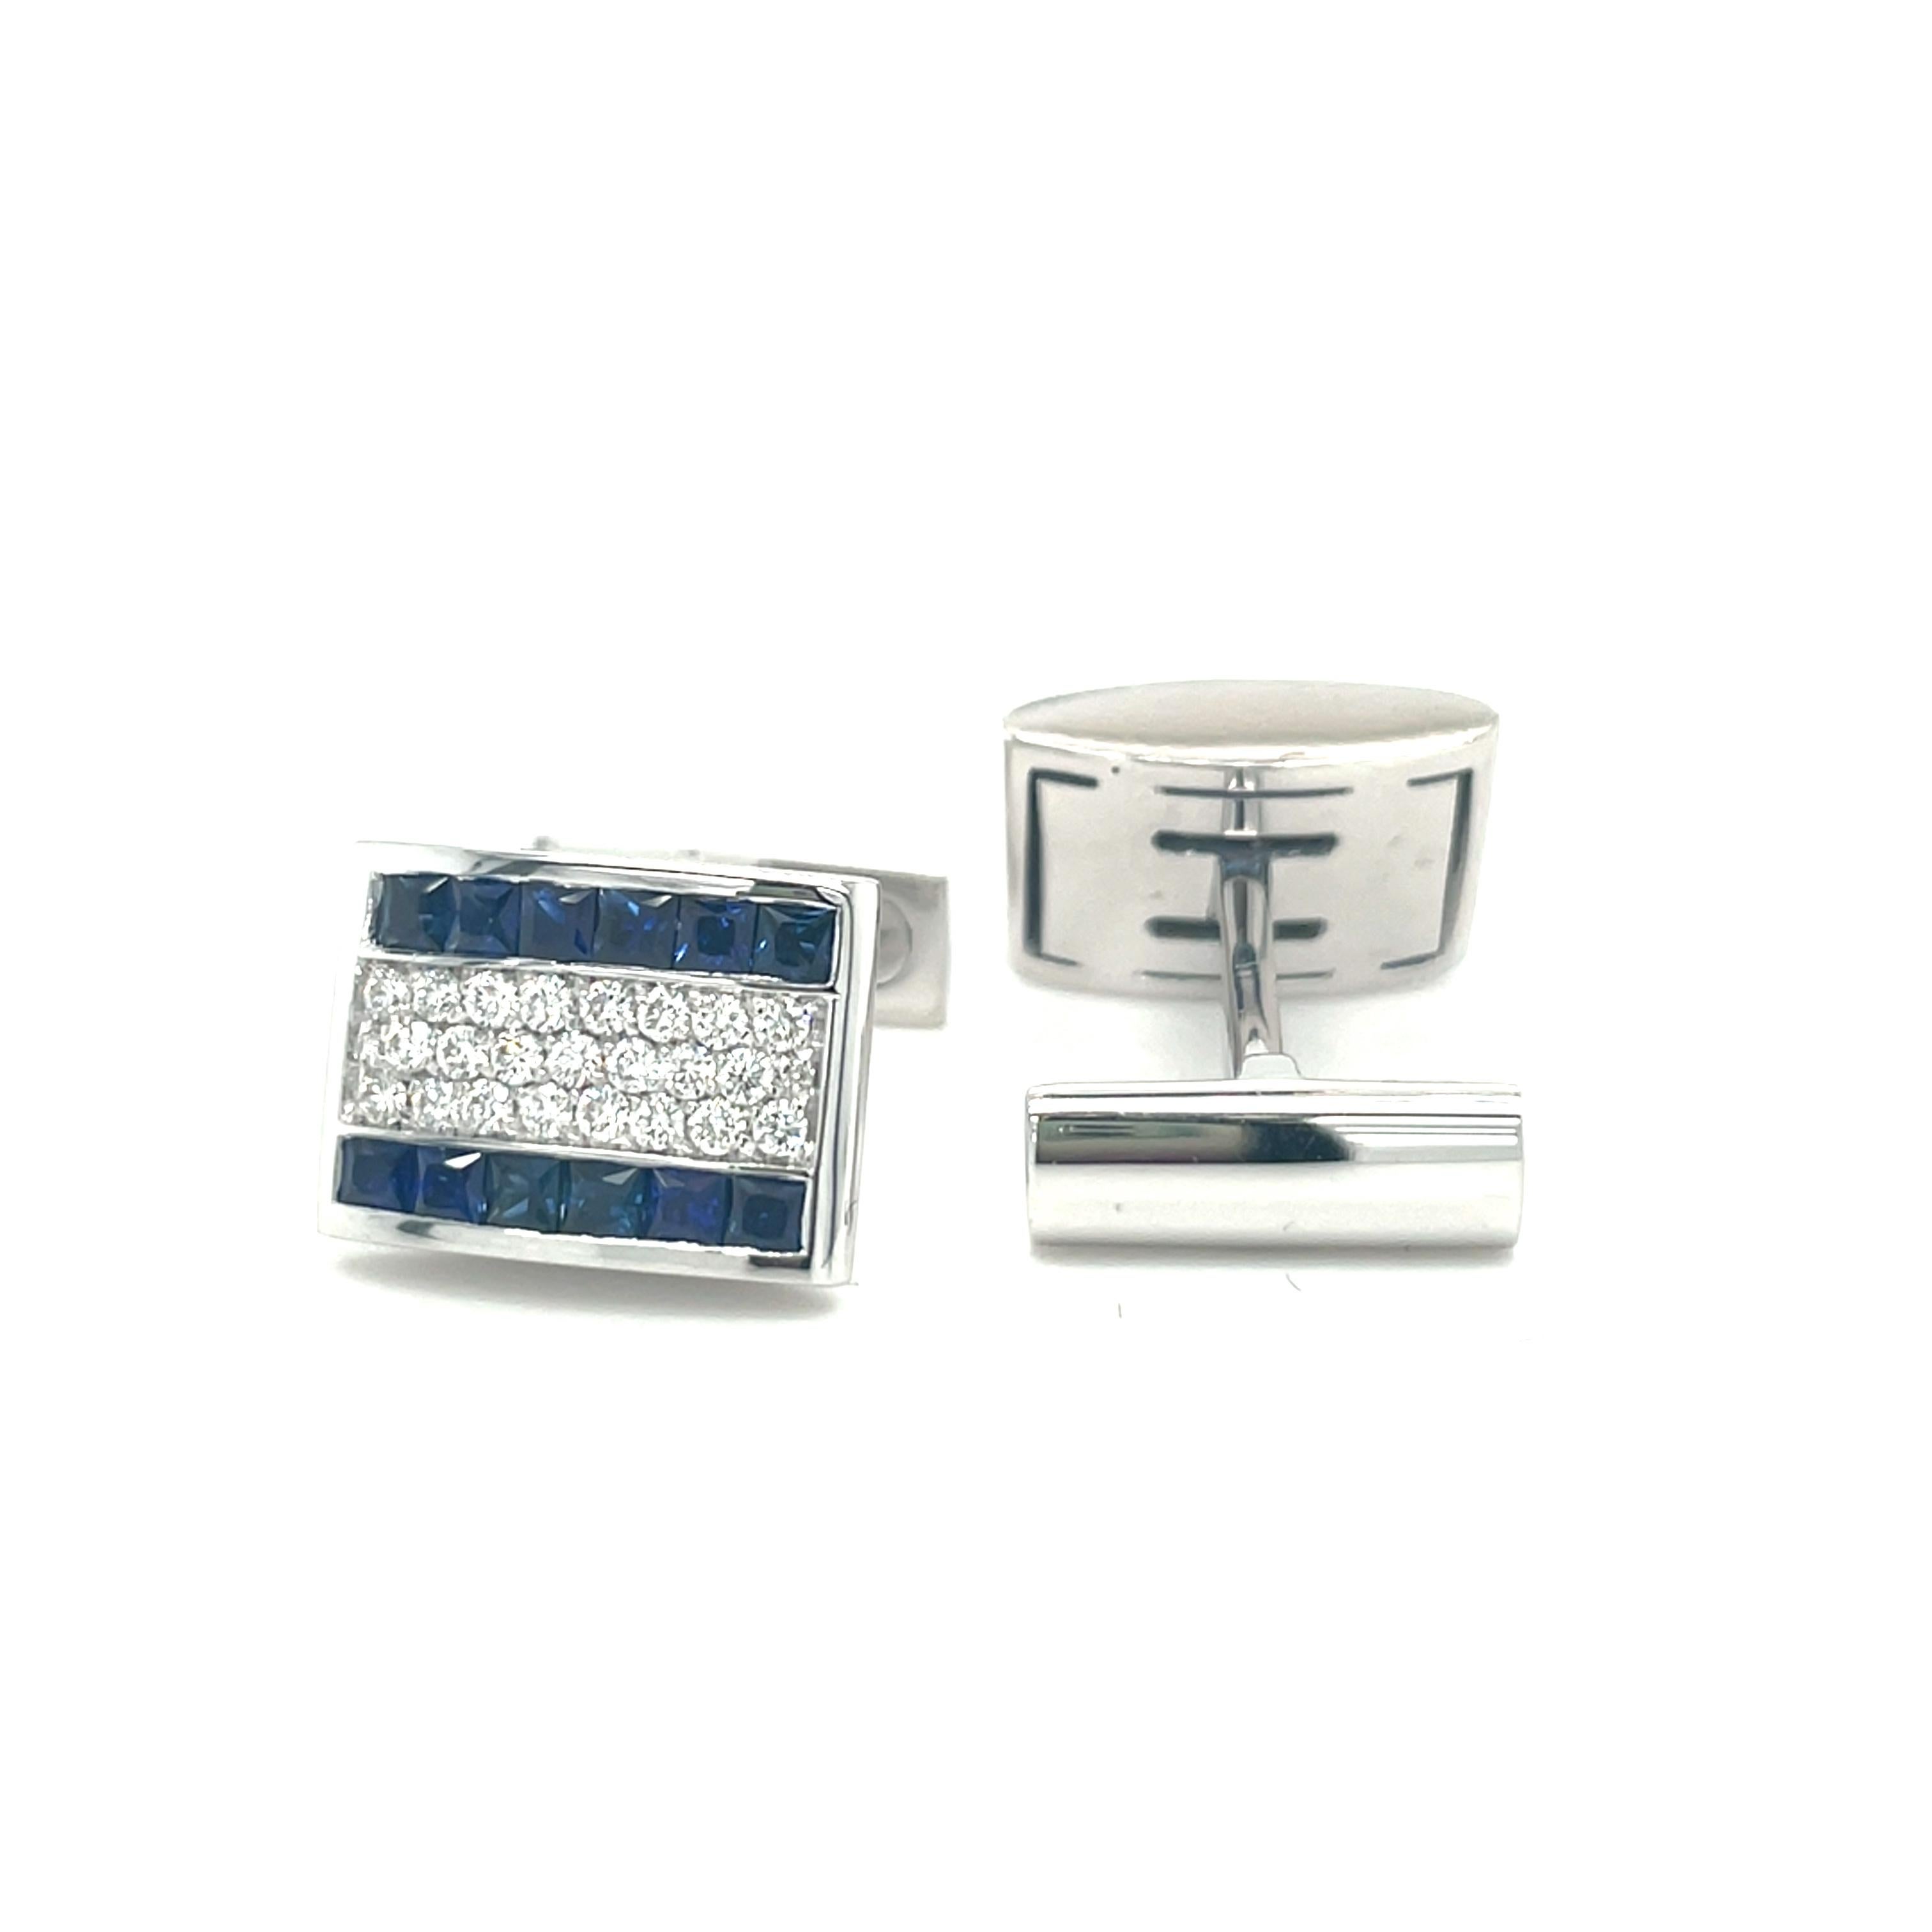 These white gold cufflinks are from Men's Collection. These cufflinks are decorated with White gold, diamond G color VS clarity 0.88 ct and blue Sapphires 2.52 ct. The dimensions of the cufflinks are 1.2cm x 1.2cm. These cufflinks are a perfect